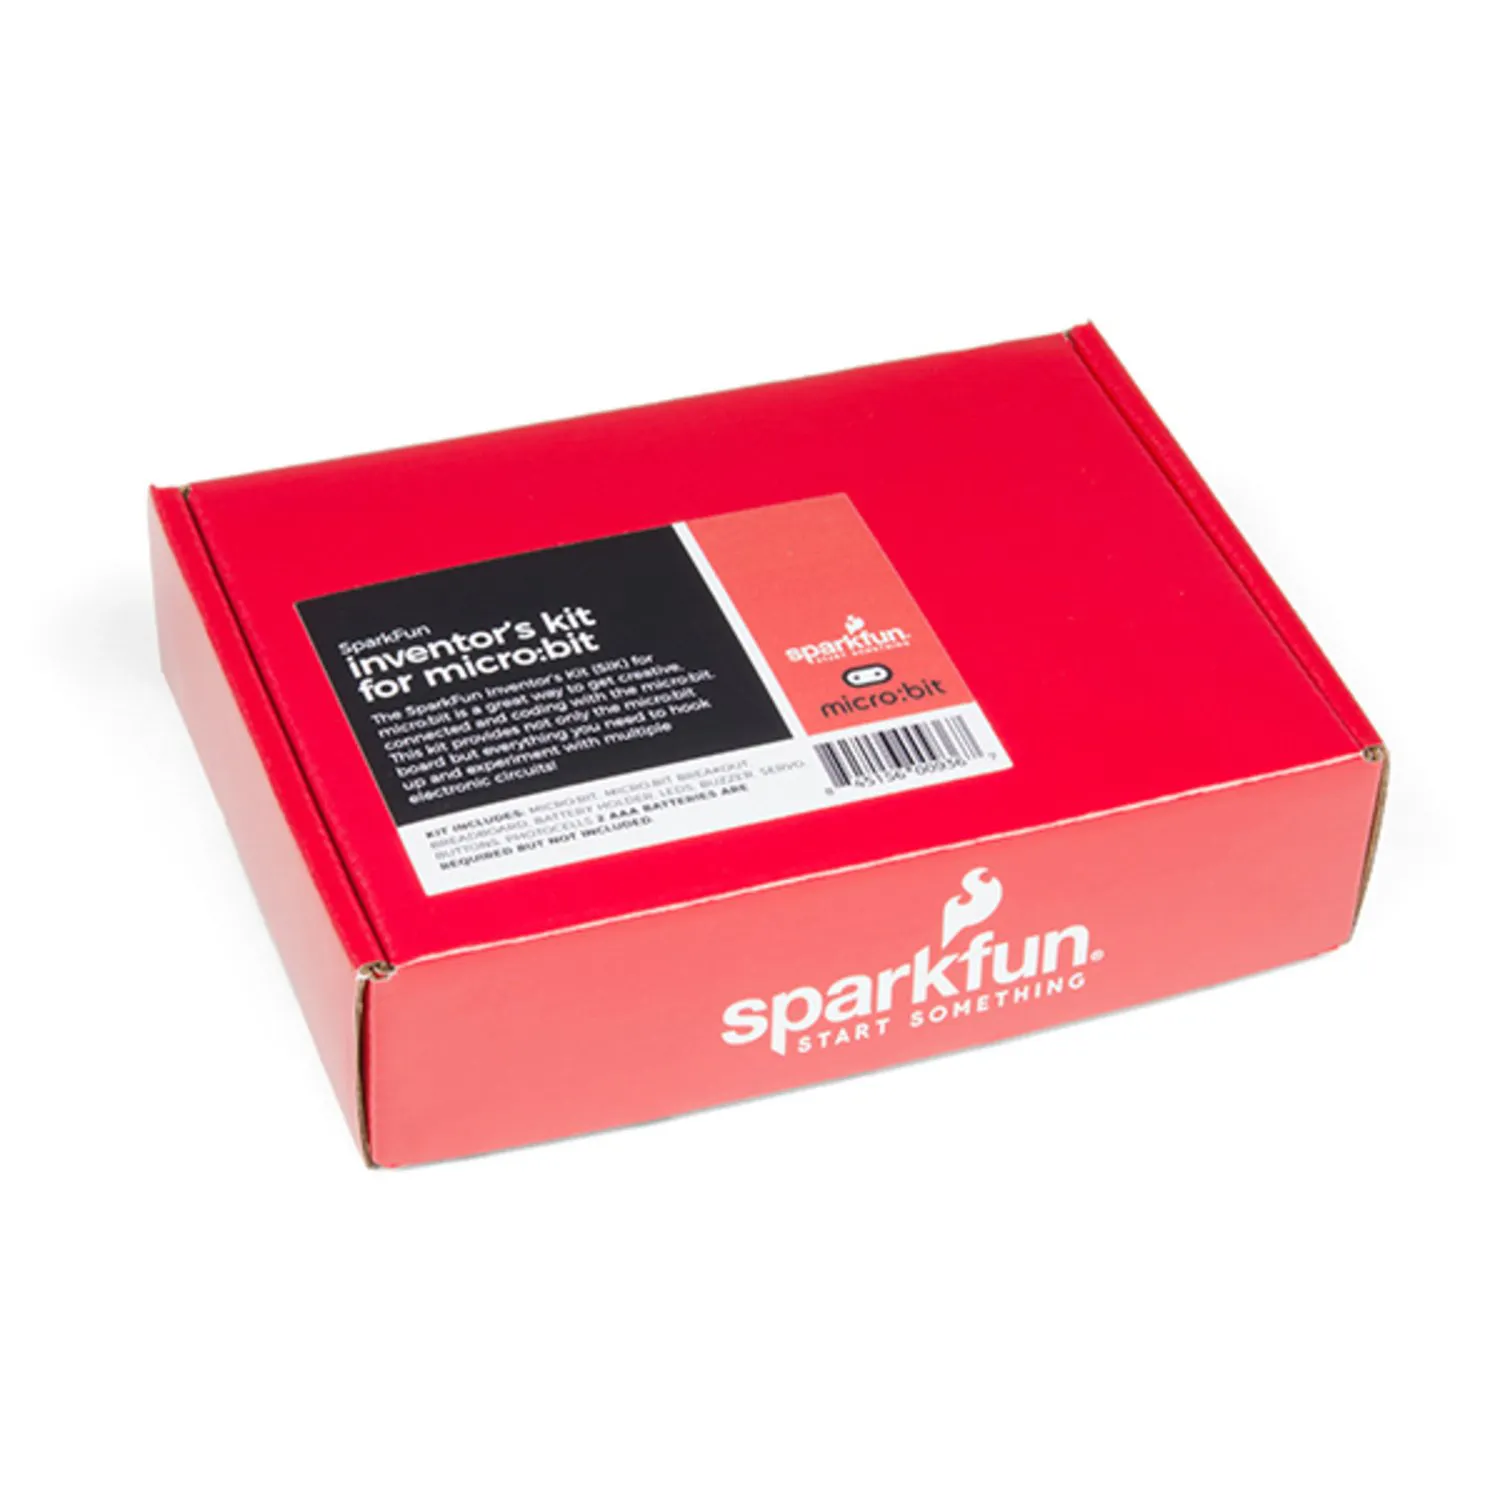 Photo of SparkFun Inventor's Kit for micro:bit v2 Lab Pack